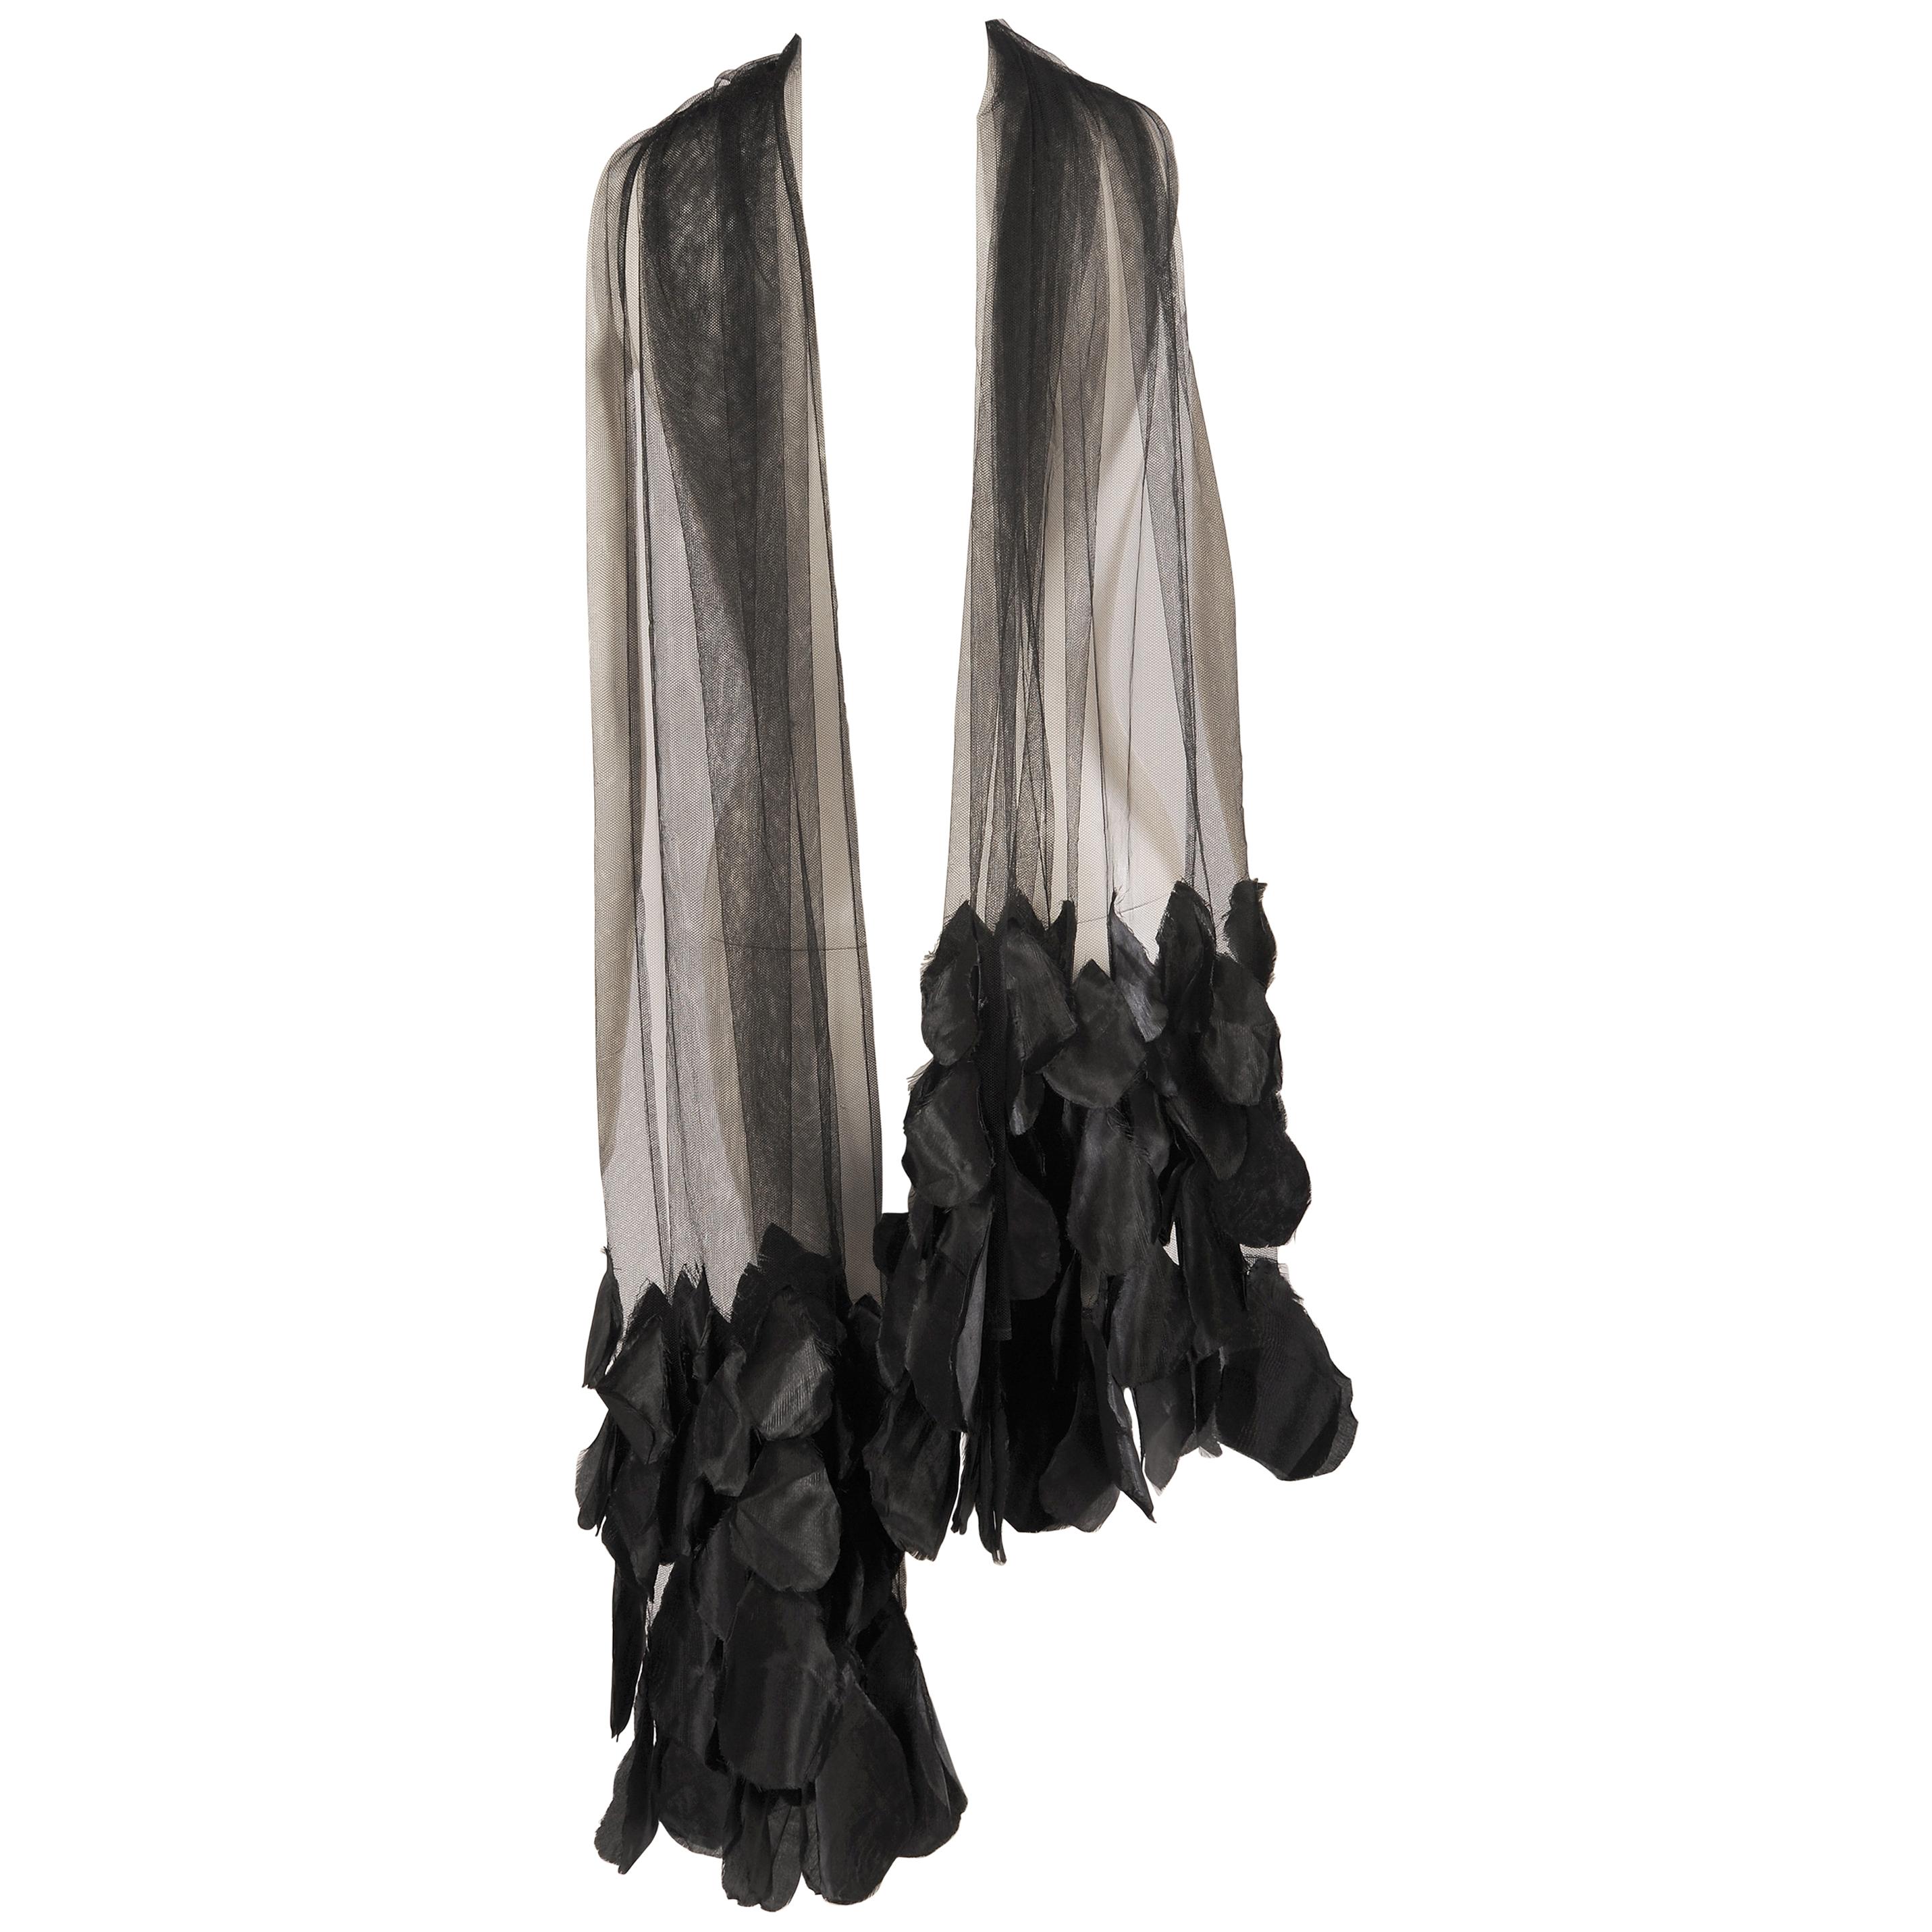 1930's Black Tulle Shawl Wrap with Appliqued Black Flower Petals